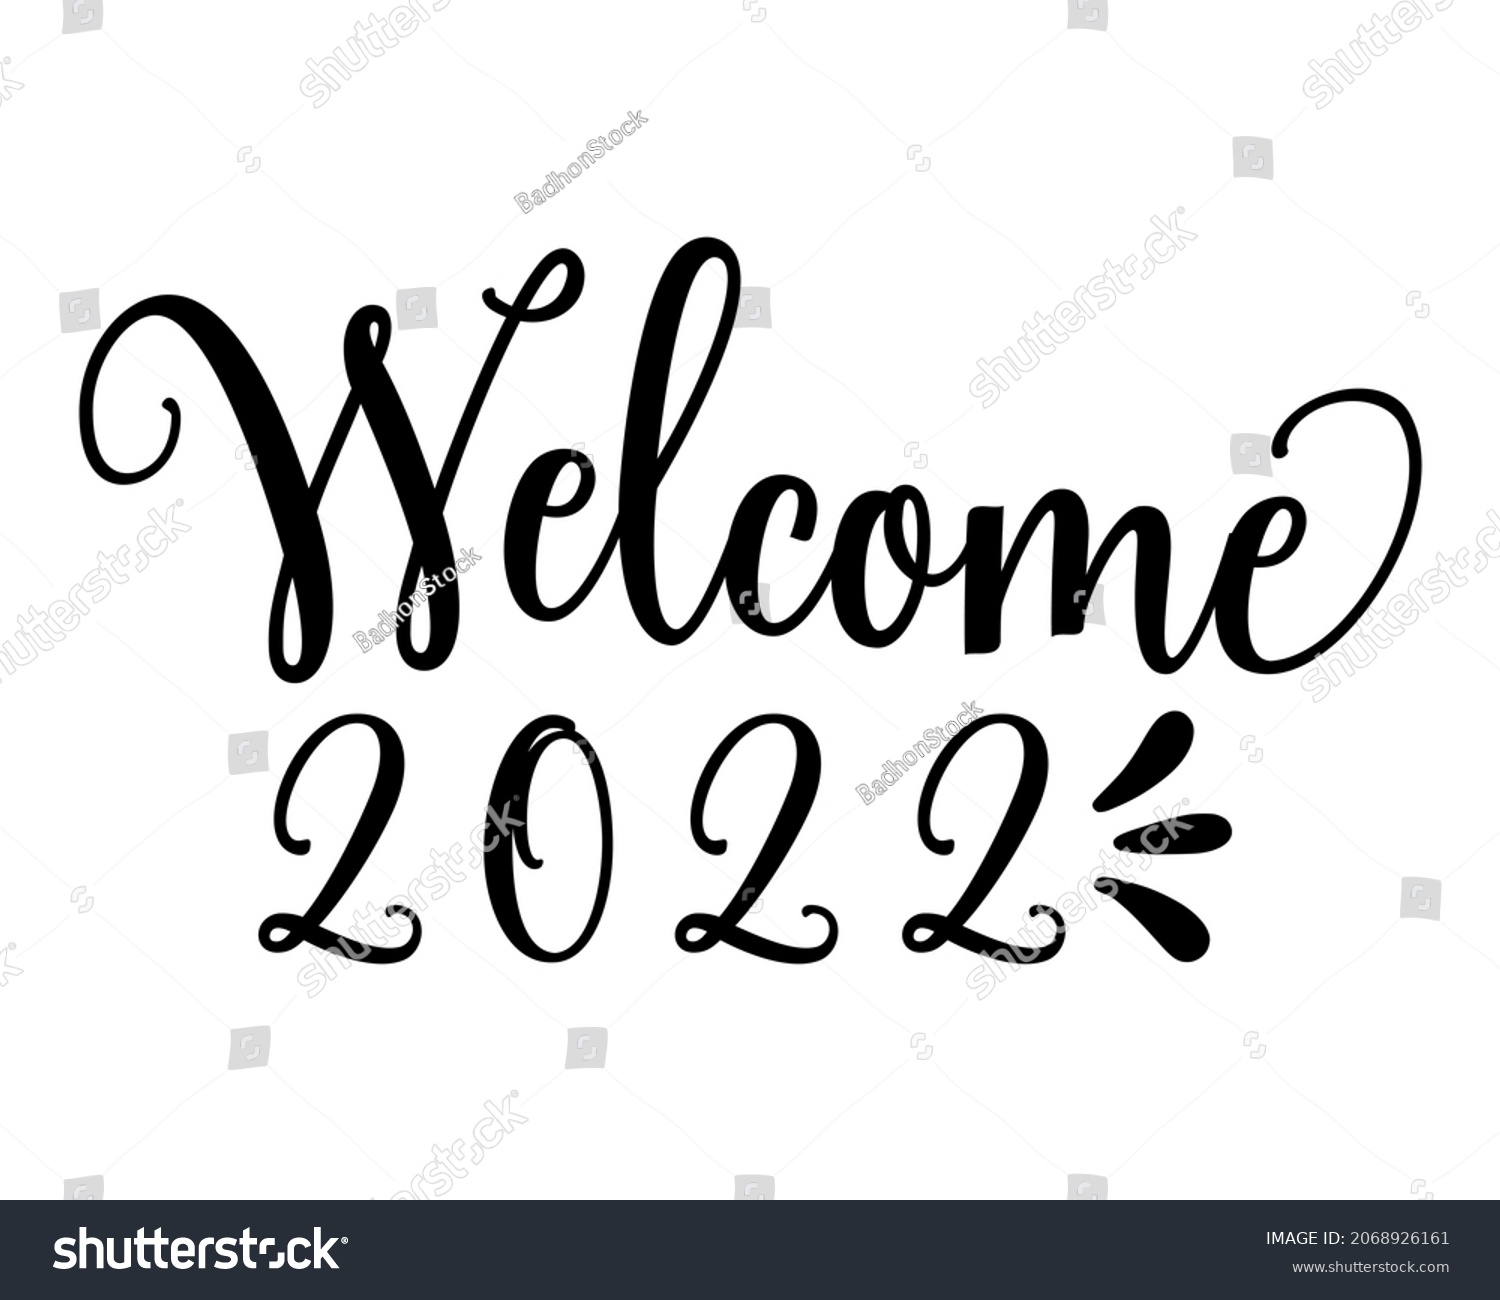 SVG of Welcome 2022 SVG Design 2 | Happy New Year SVG Cut File for Cutting | New year concept, lettering vector illustration isolated on white background. svg